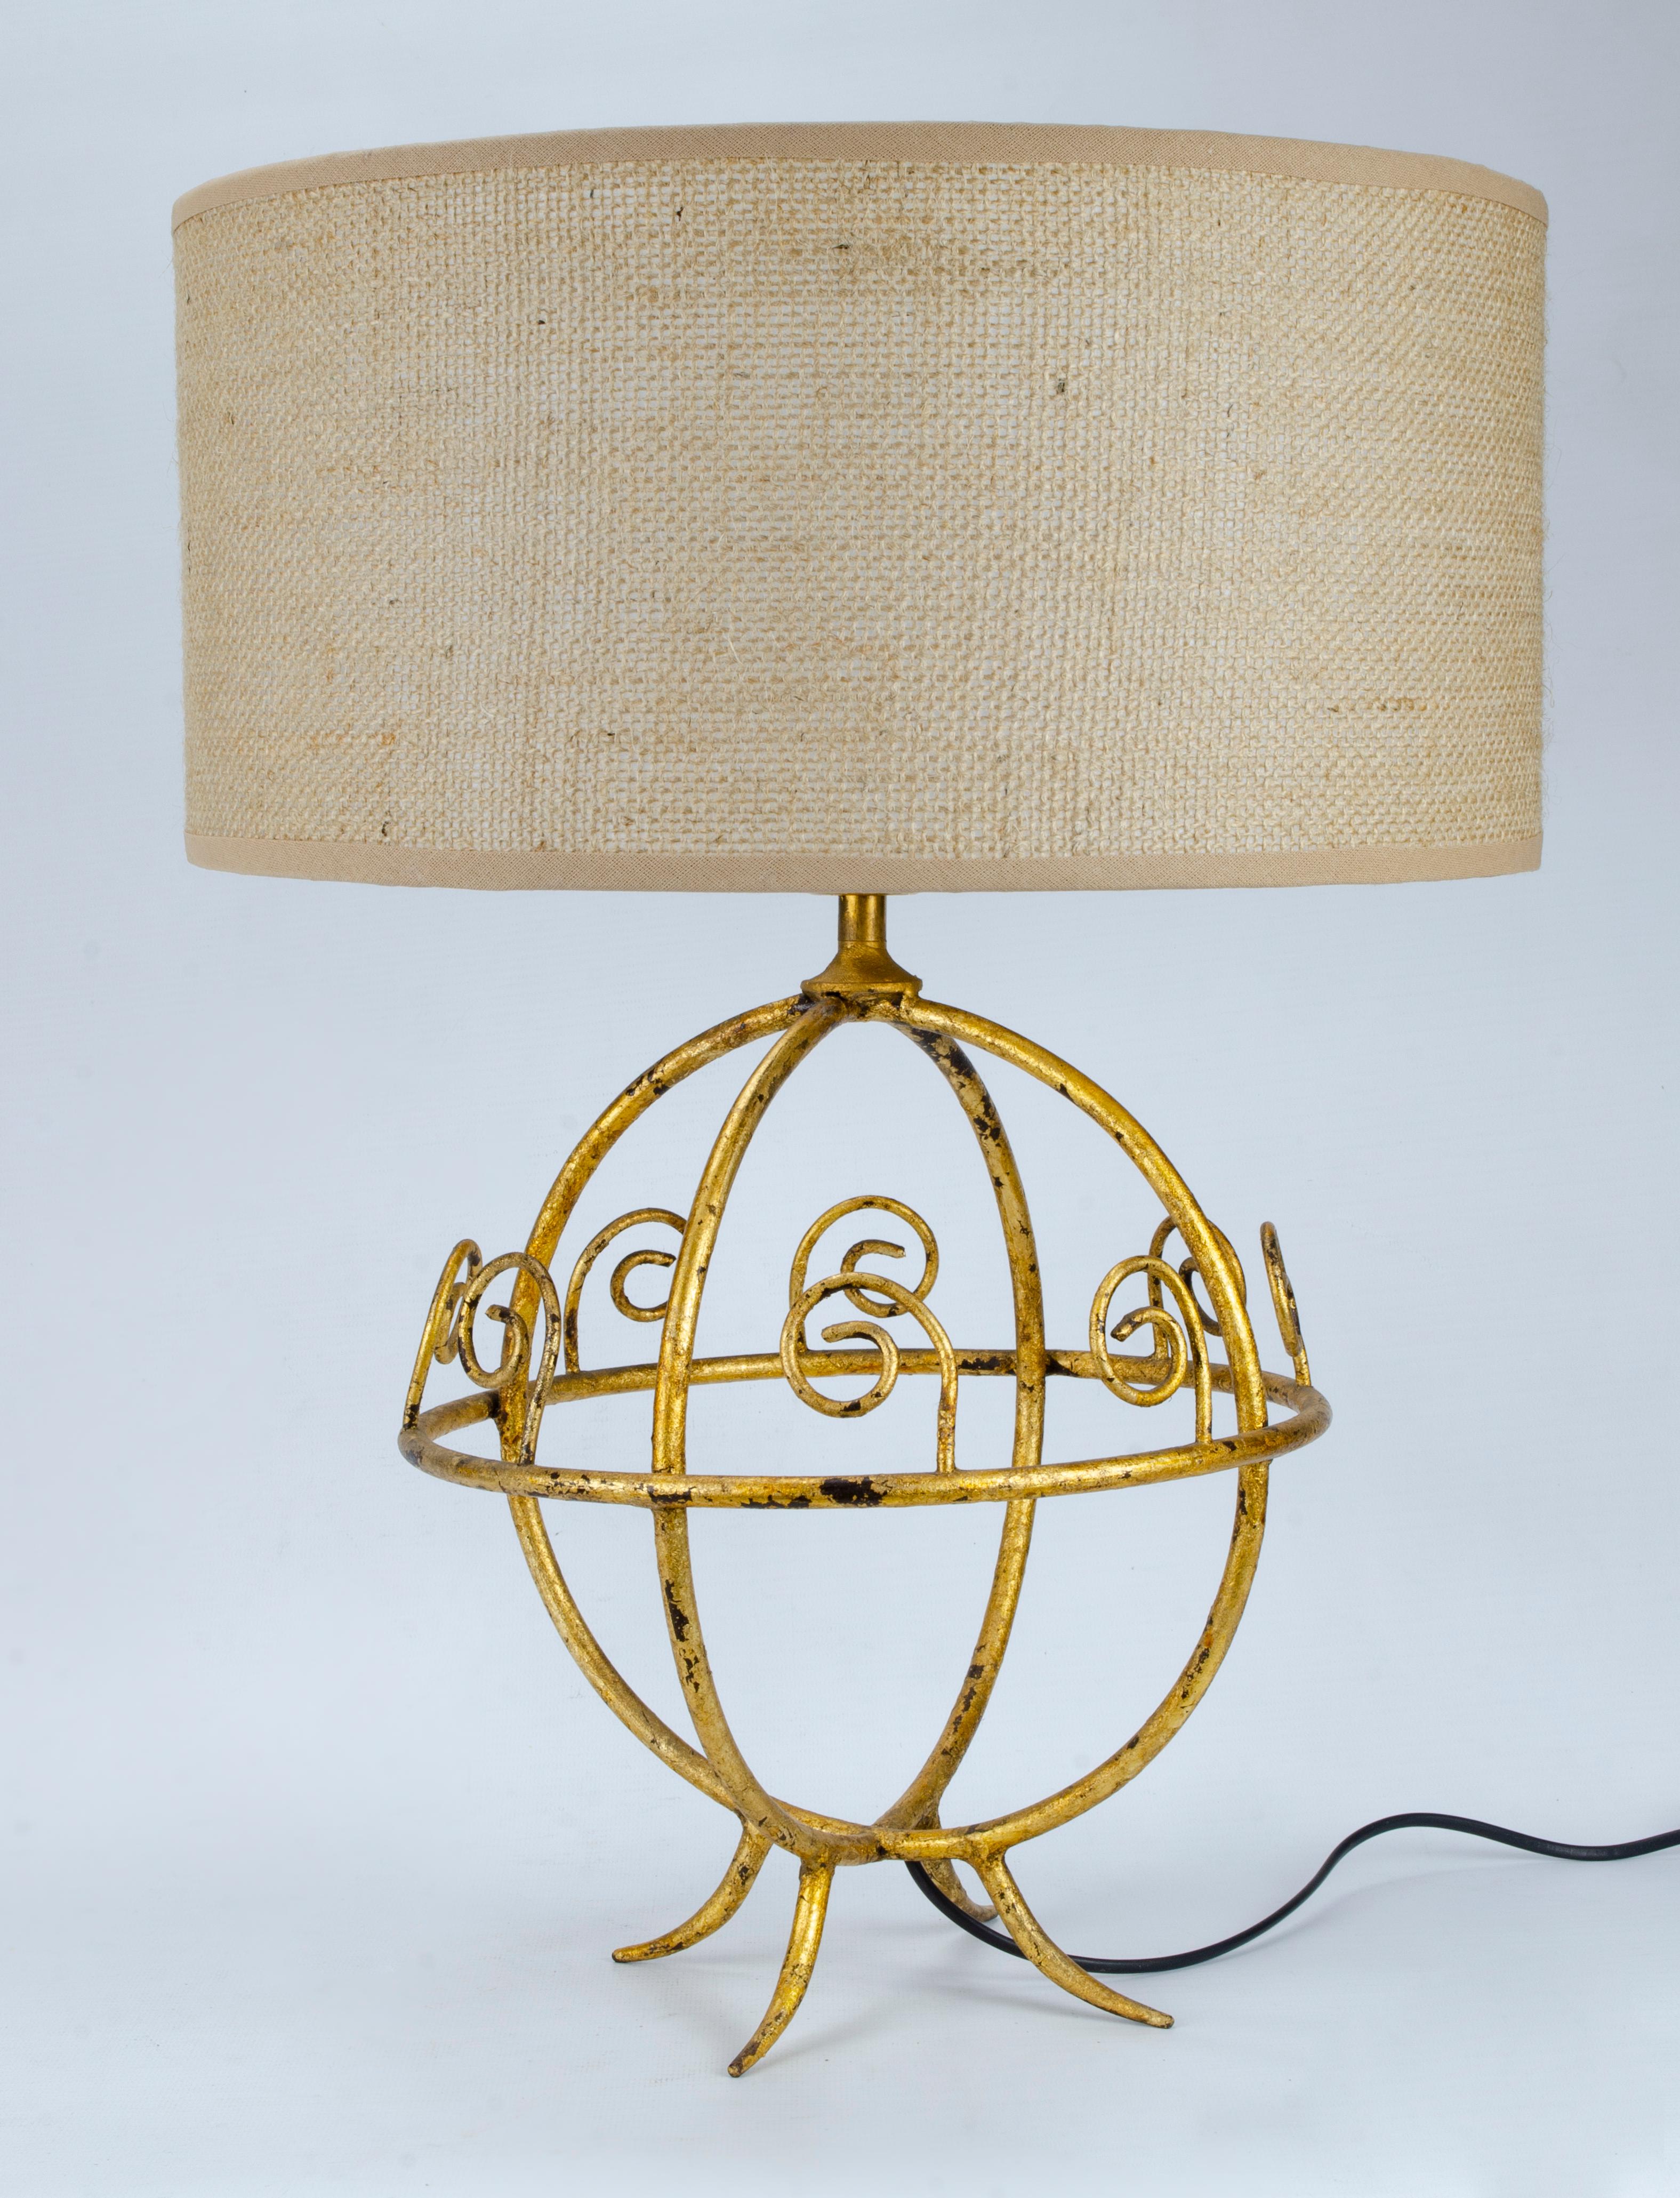 Pair of mid-century lamps
gold leaf technique
The gold has some wear
Possibly originating from Fracia
circa 1940
New burlap screens
electrified 220w.